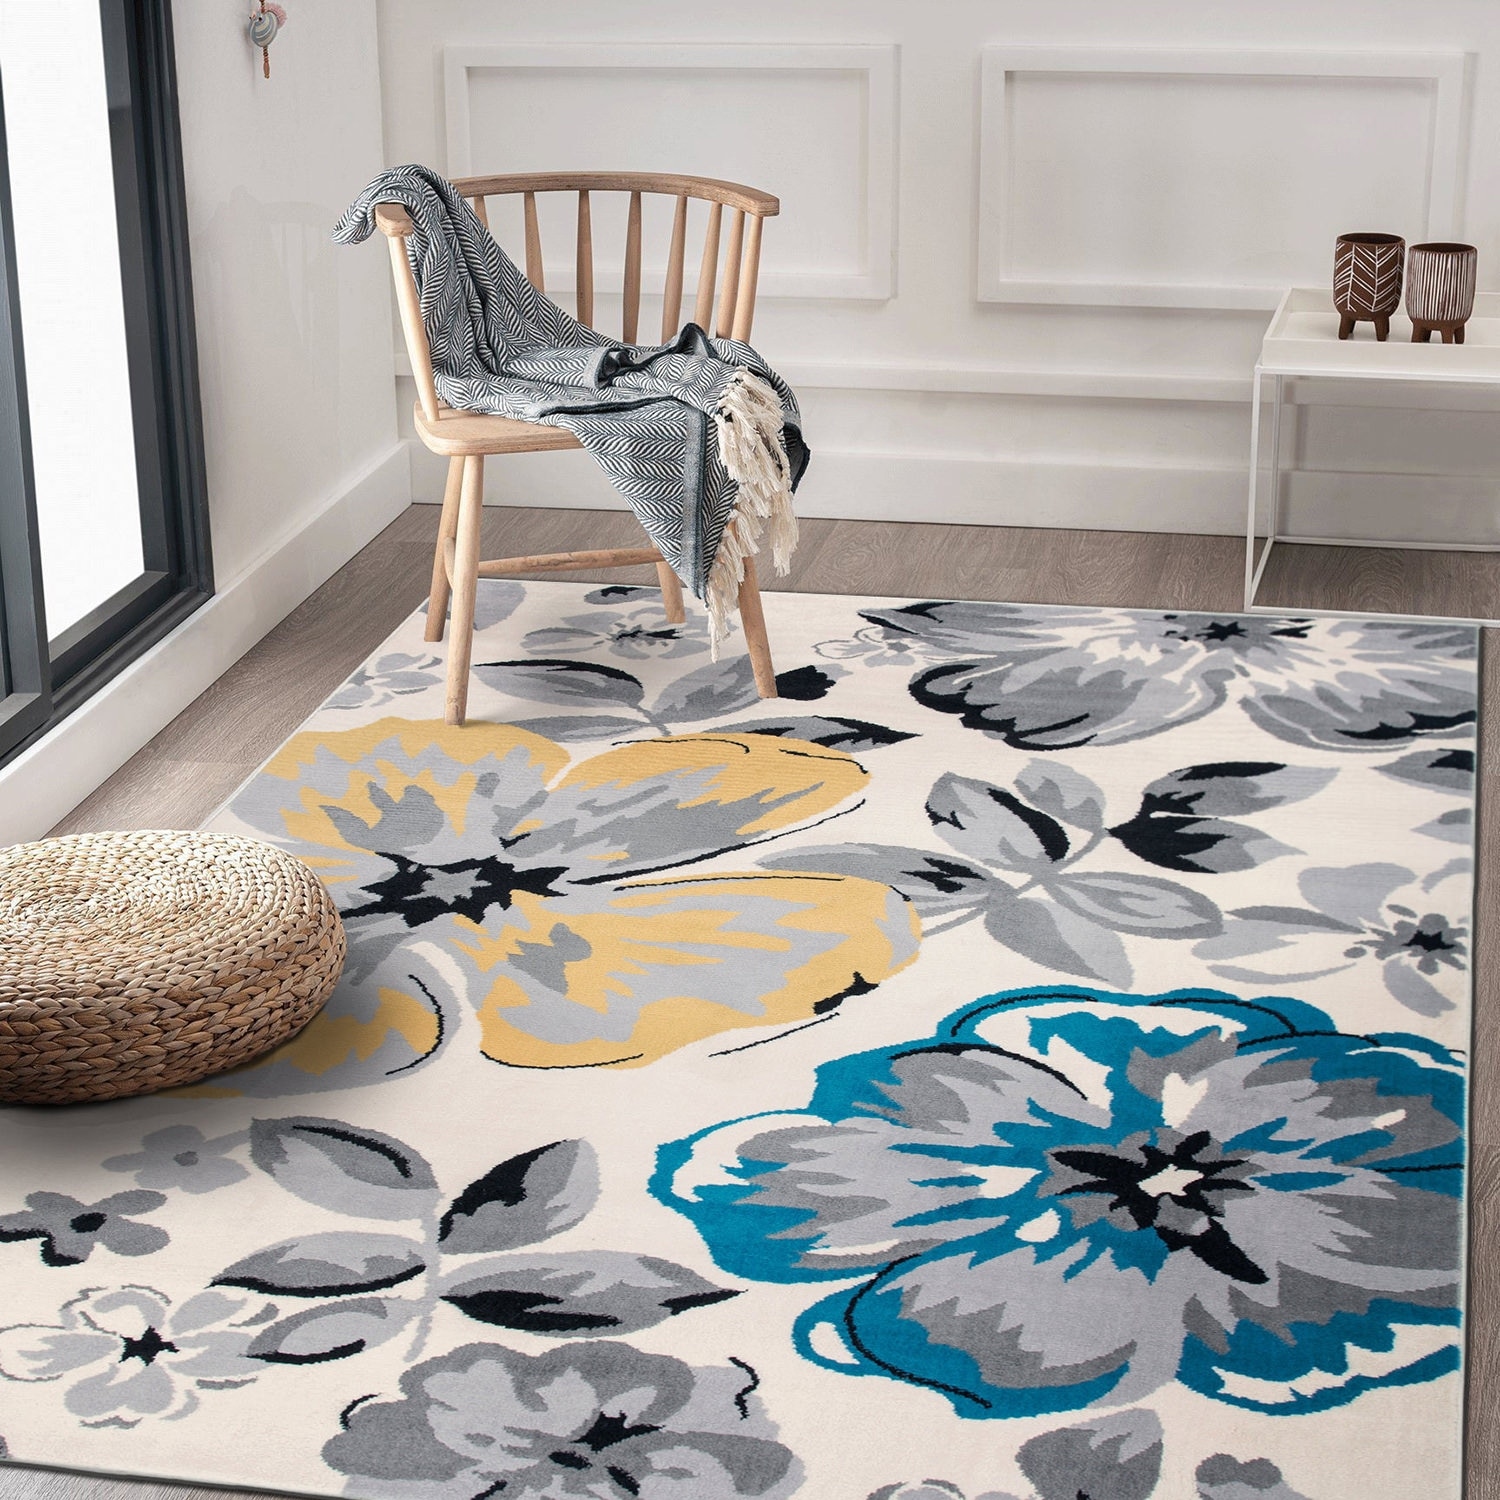 Details about   Modern Floral Circles Design Area Rugs 7'6" X 9' 5" Blue 